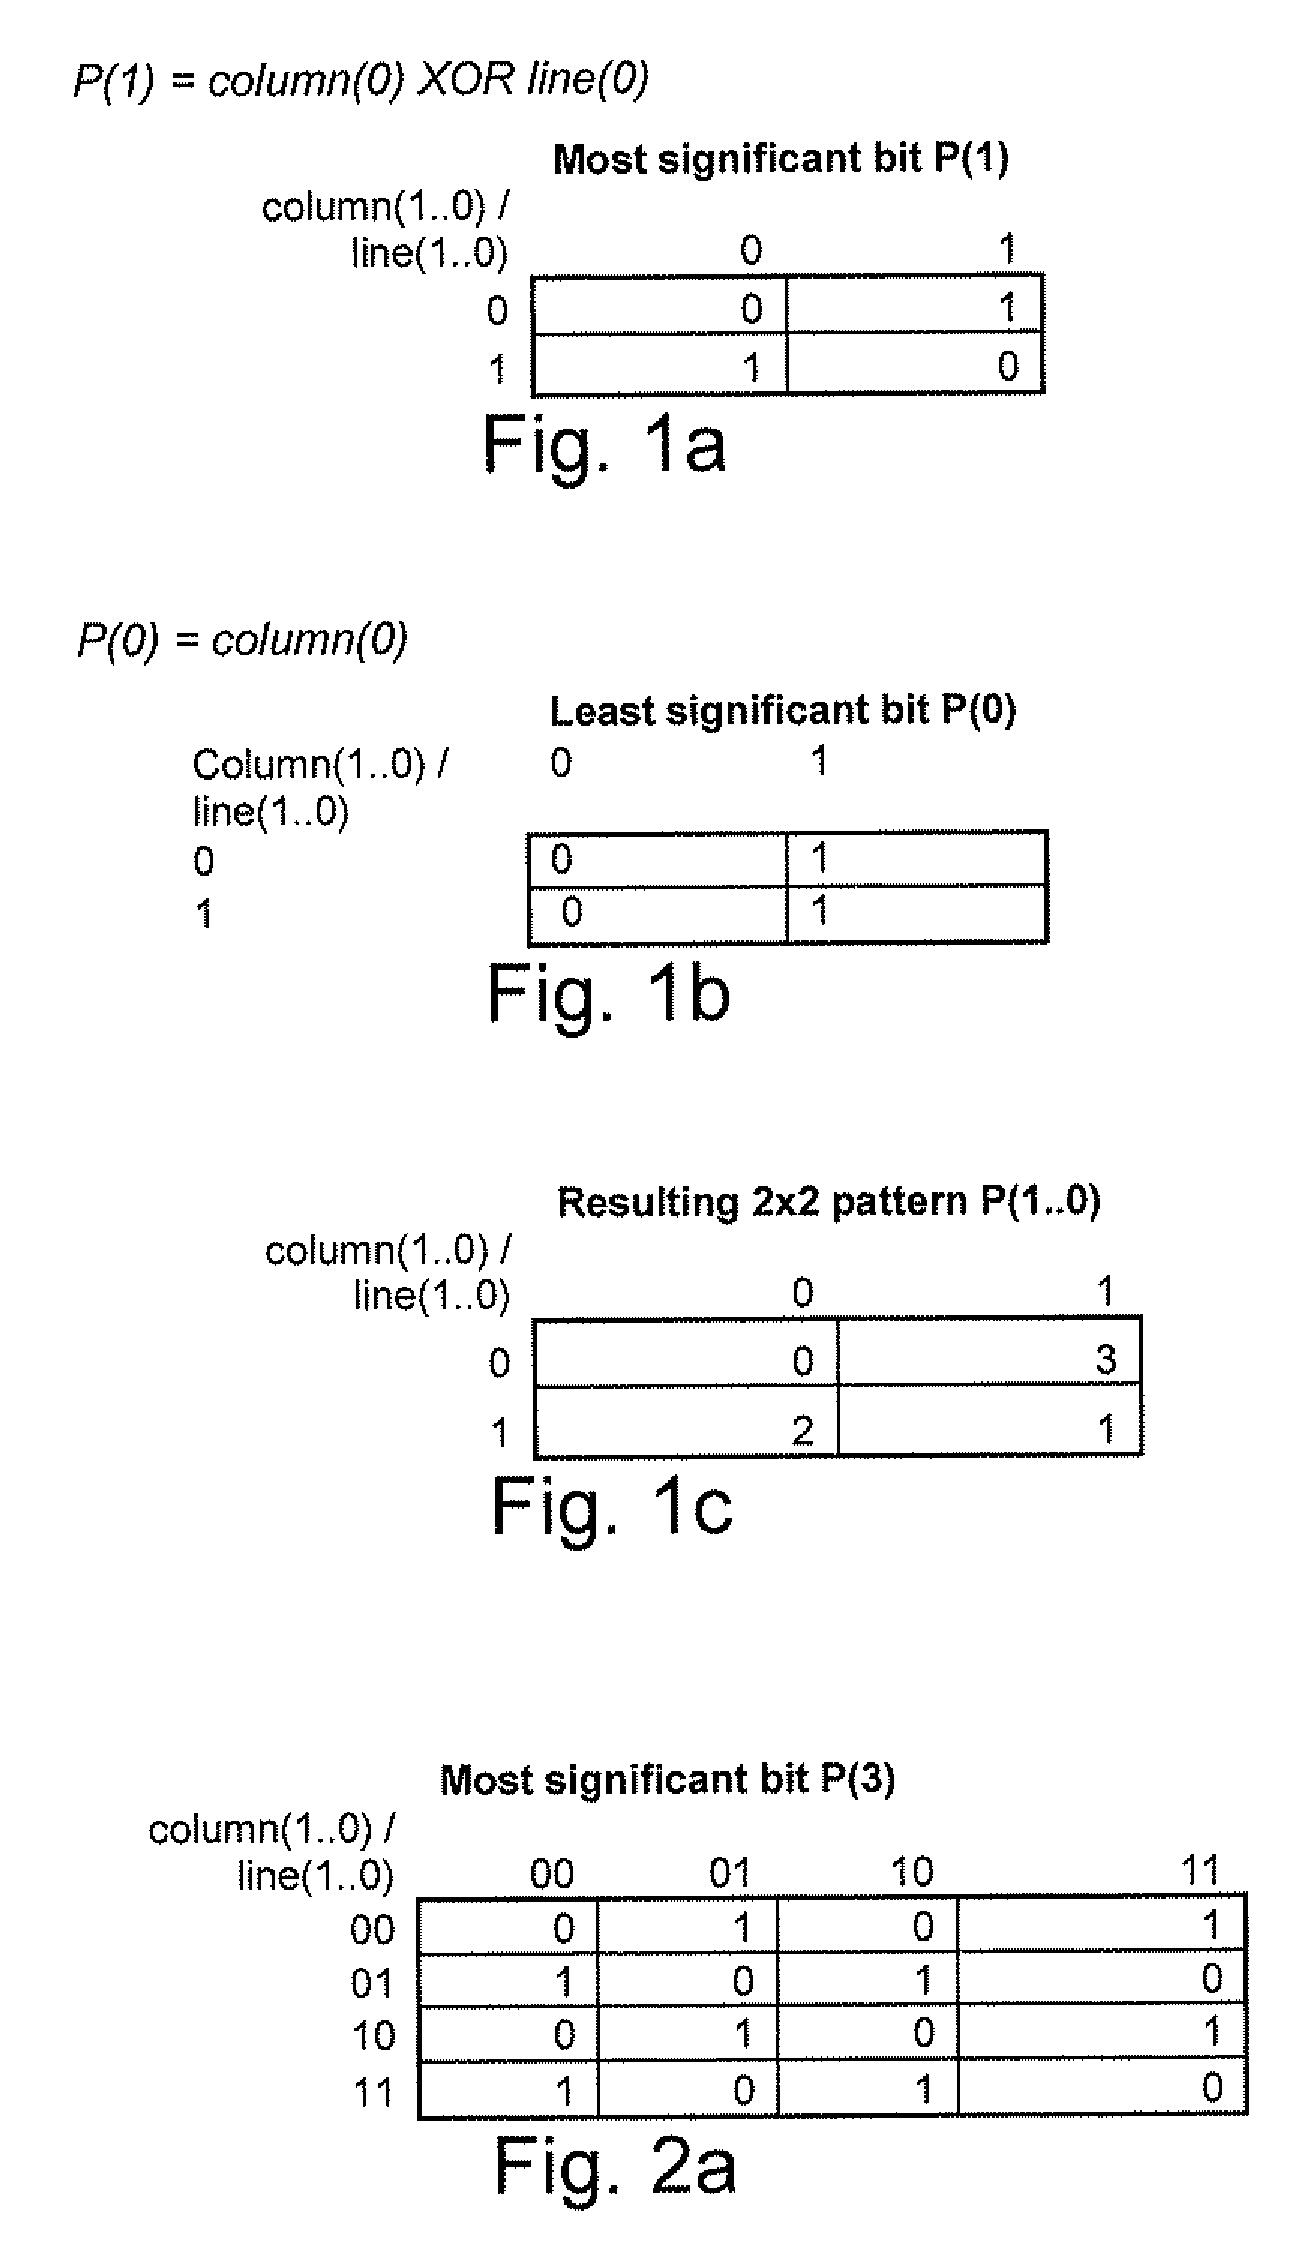 Method and device to enhance image quality in digital video processing systems using dithering